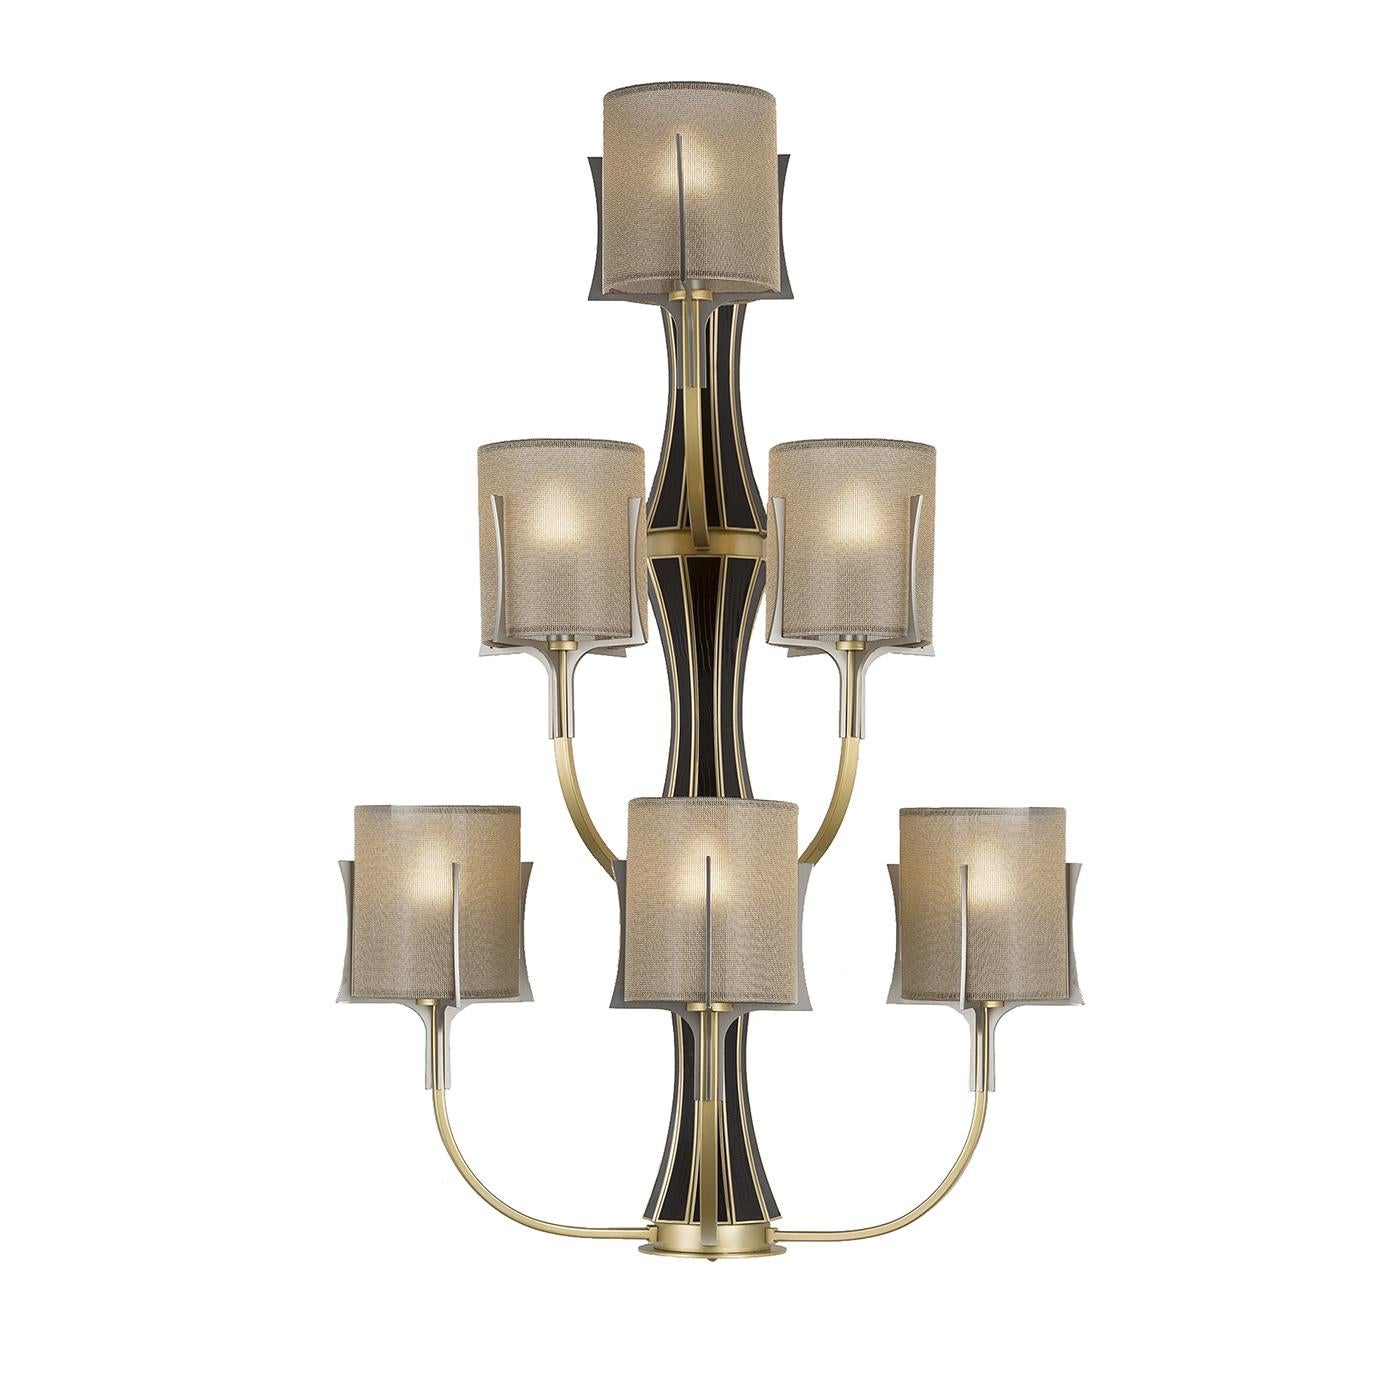 This elegant sconce will be a magnificent addition to an entryway, a hallway, or even a bathroom. Its vertical brass structure is adorned with inserts in black leather, whose color contrasts with the warm glow of the metal. The six lights are